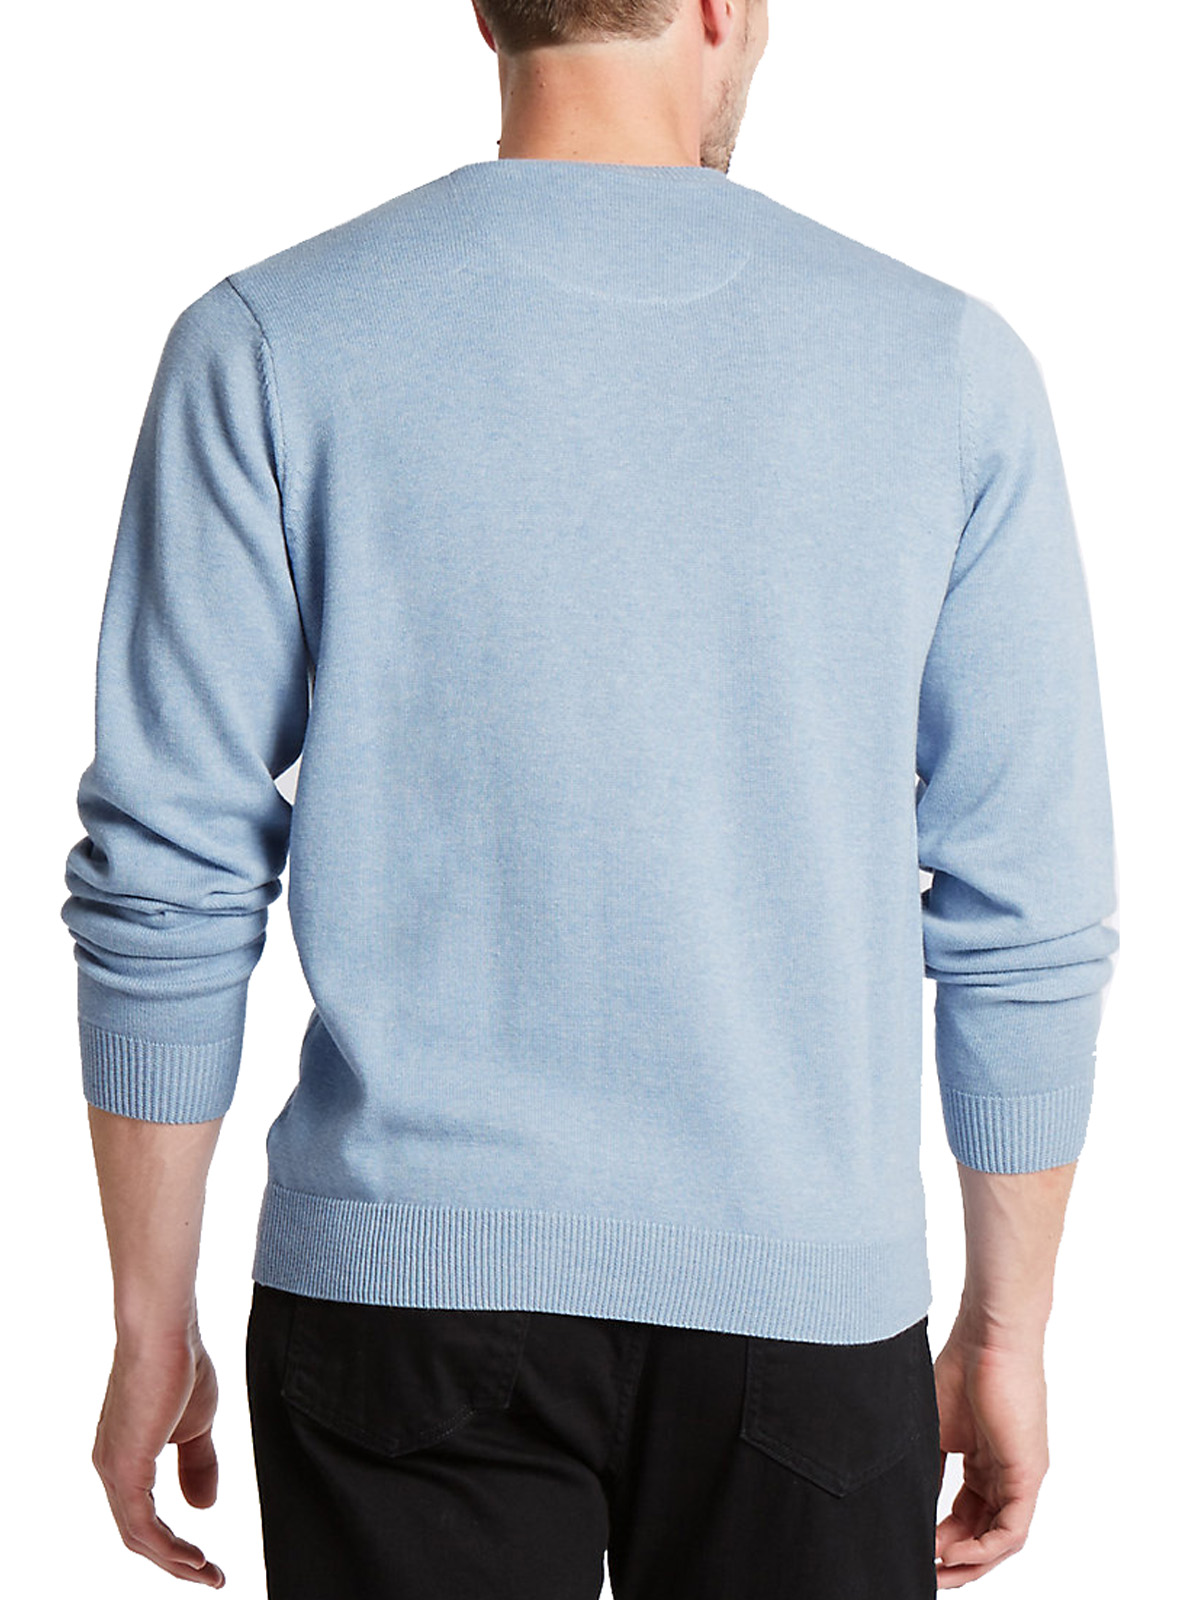 Marks and Spencer - - M&5 CHAMBRAY Pure Cotton Crew Neck Jumper - Size ...